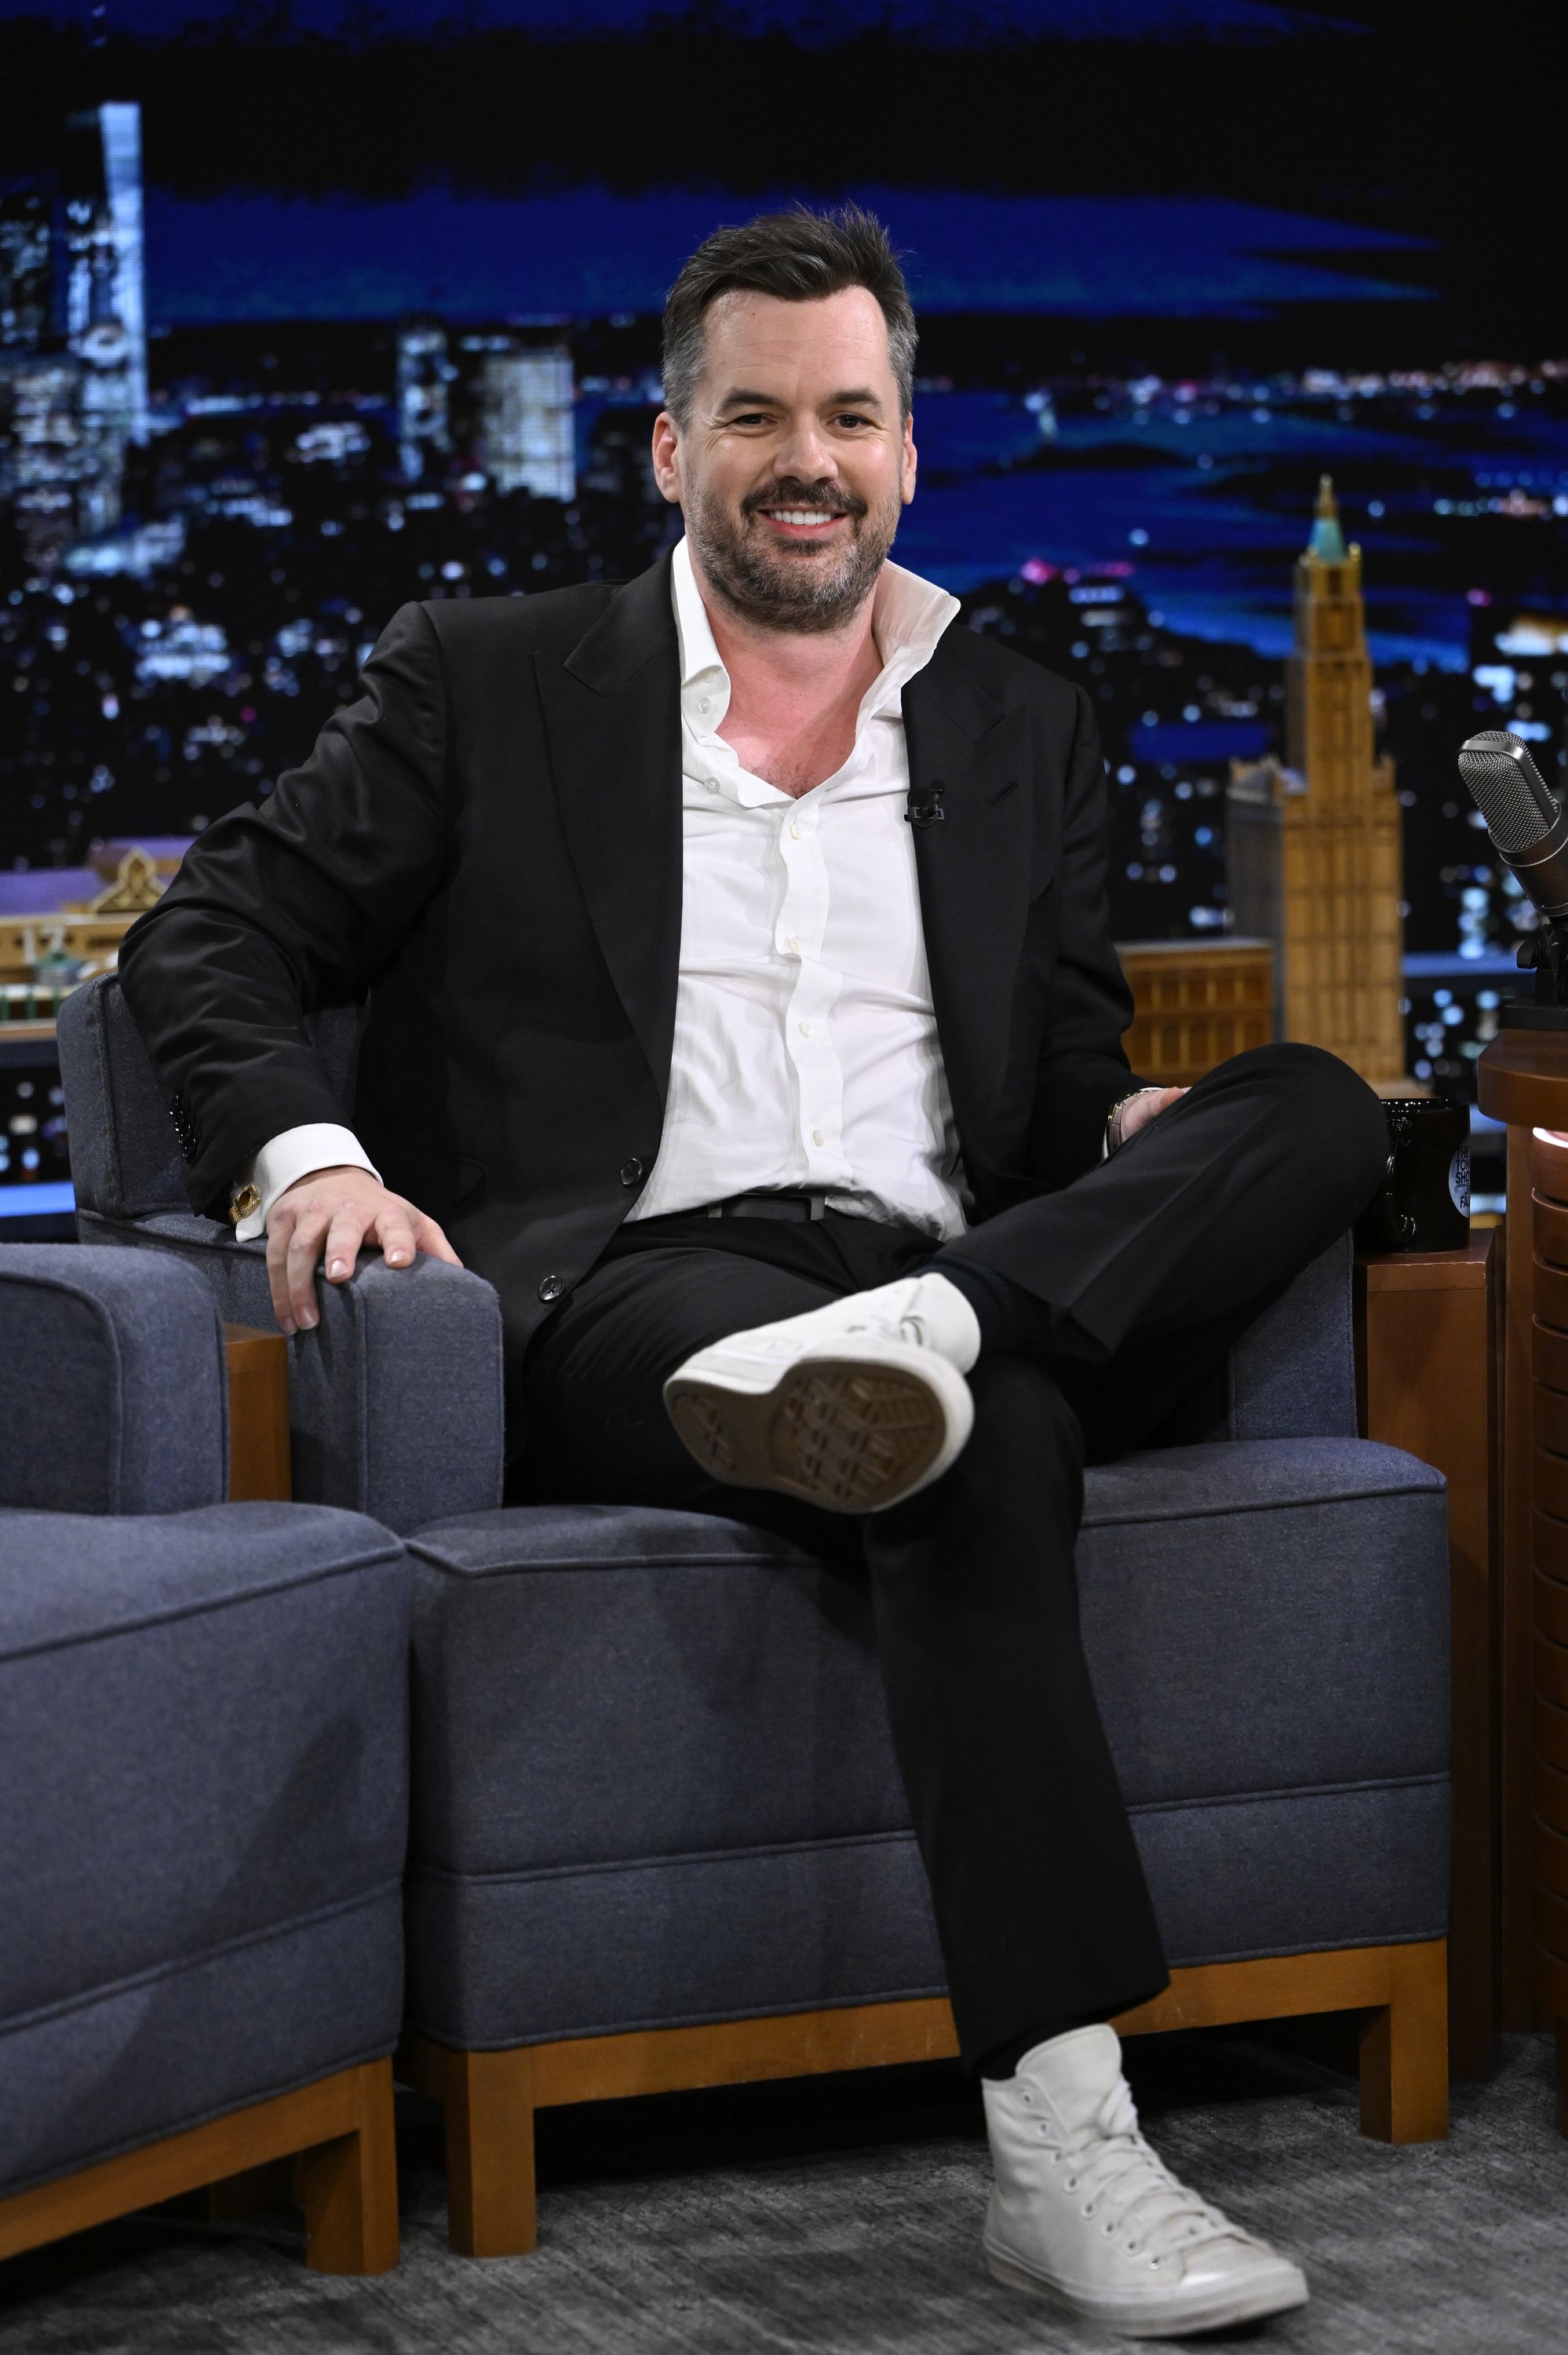 Jim Jefferies is pictured during an interview on "The Tonight Show Starring Jimmy Fallon" on March 24, 2022, in an unspecified location | Source: Getty Images